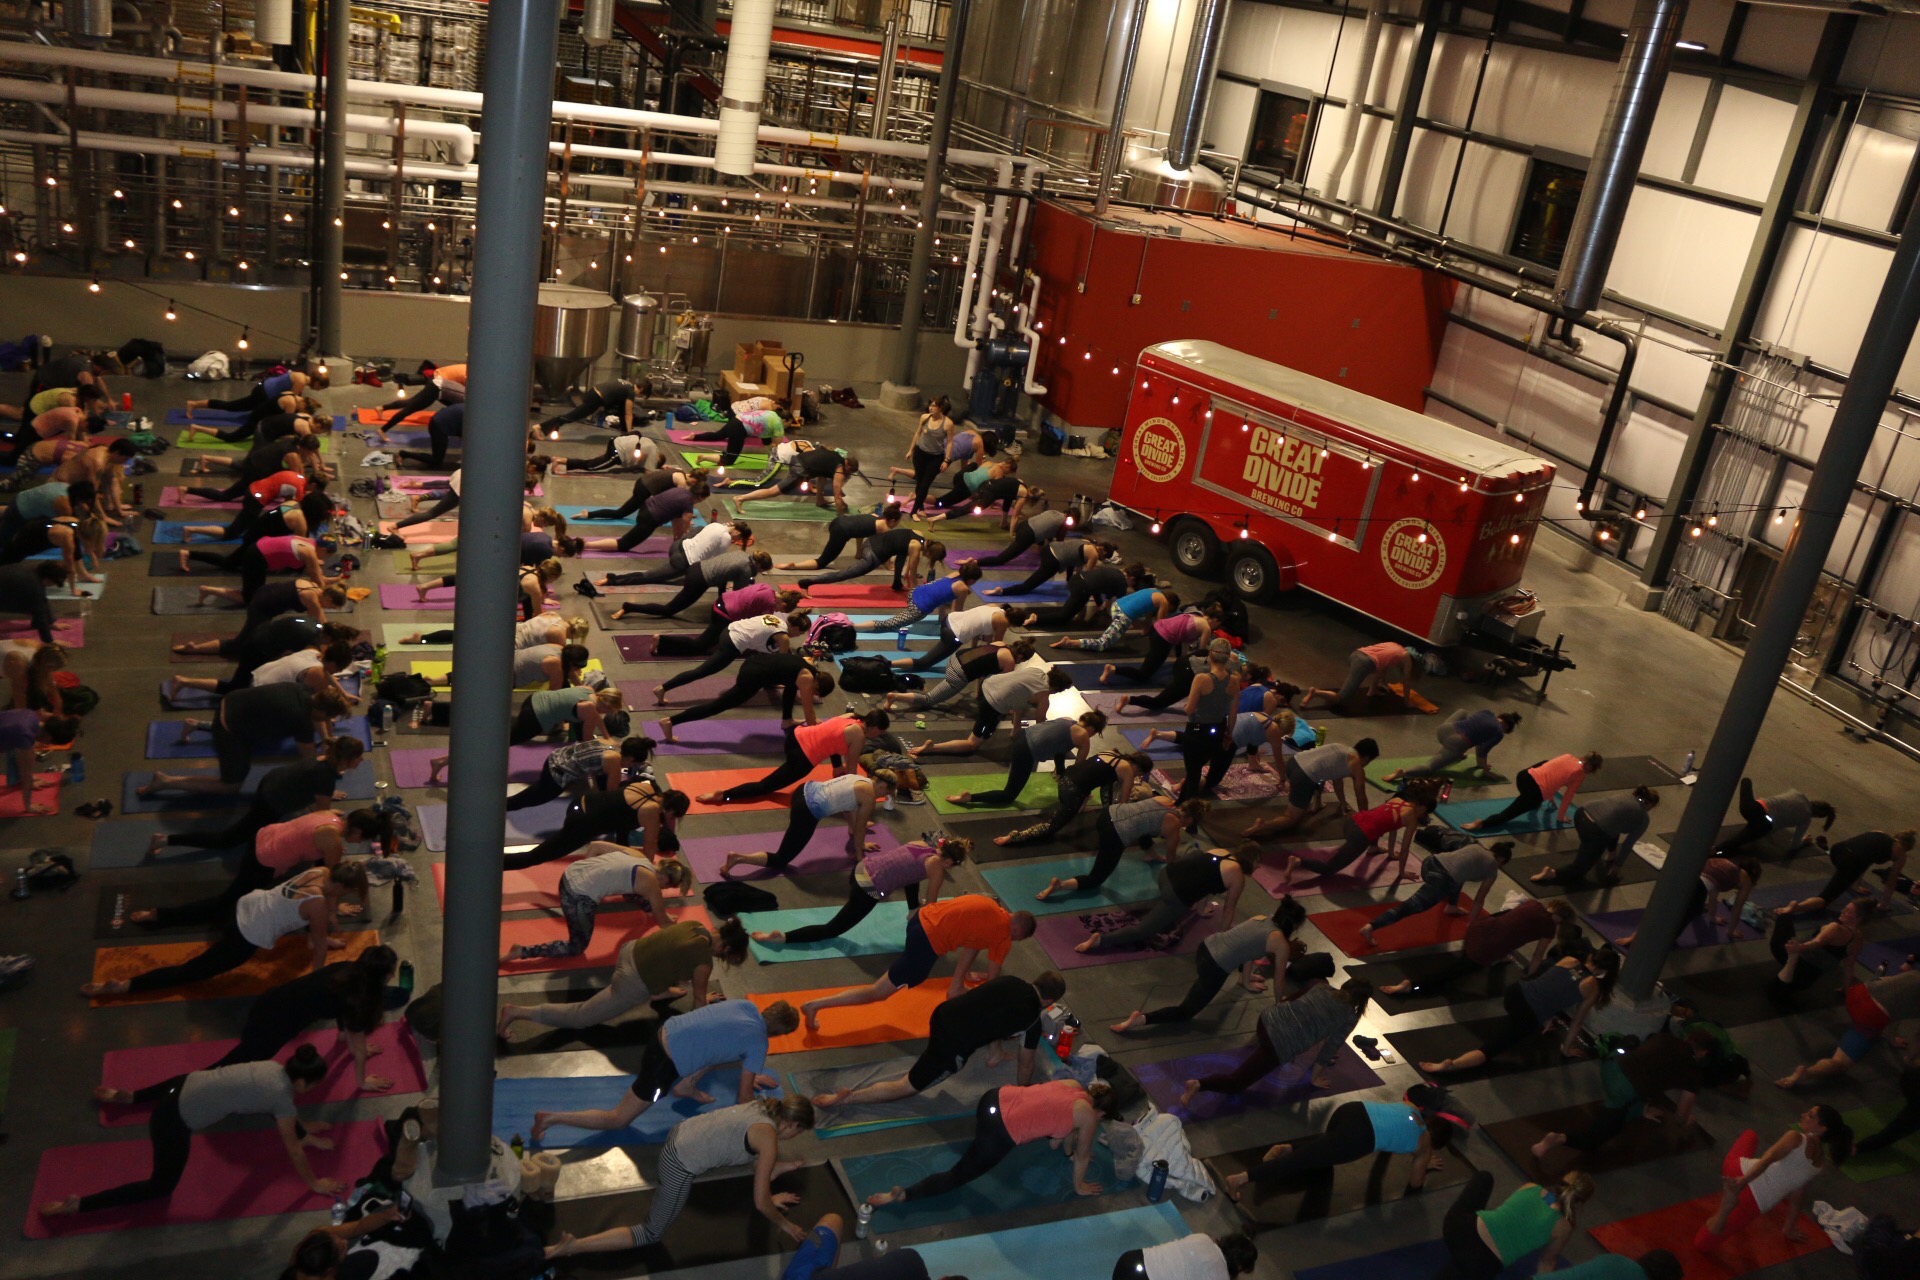 Is the Beer + Yoga Trend Here to Stay?